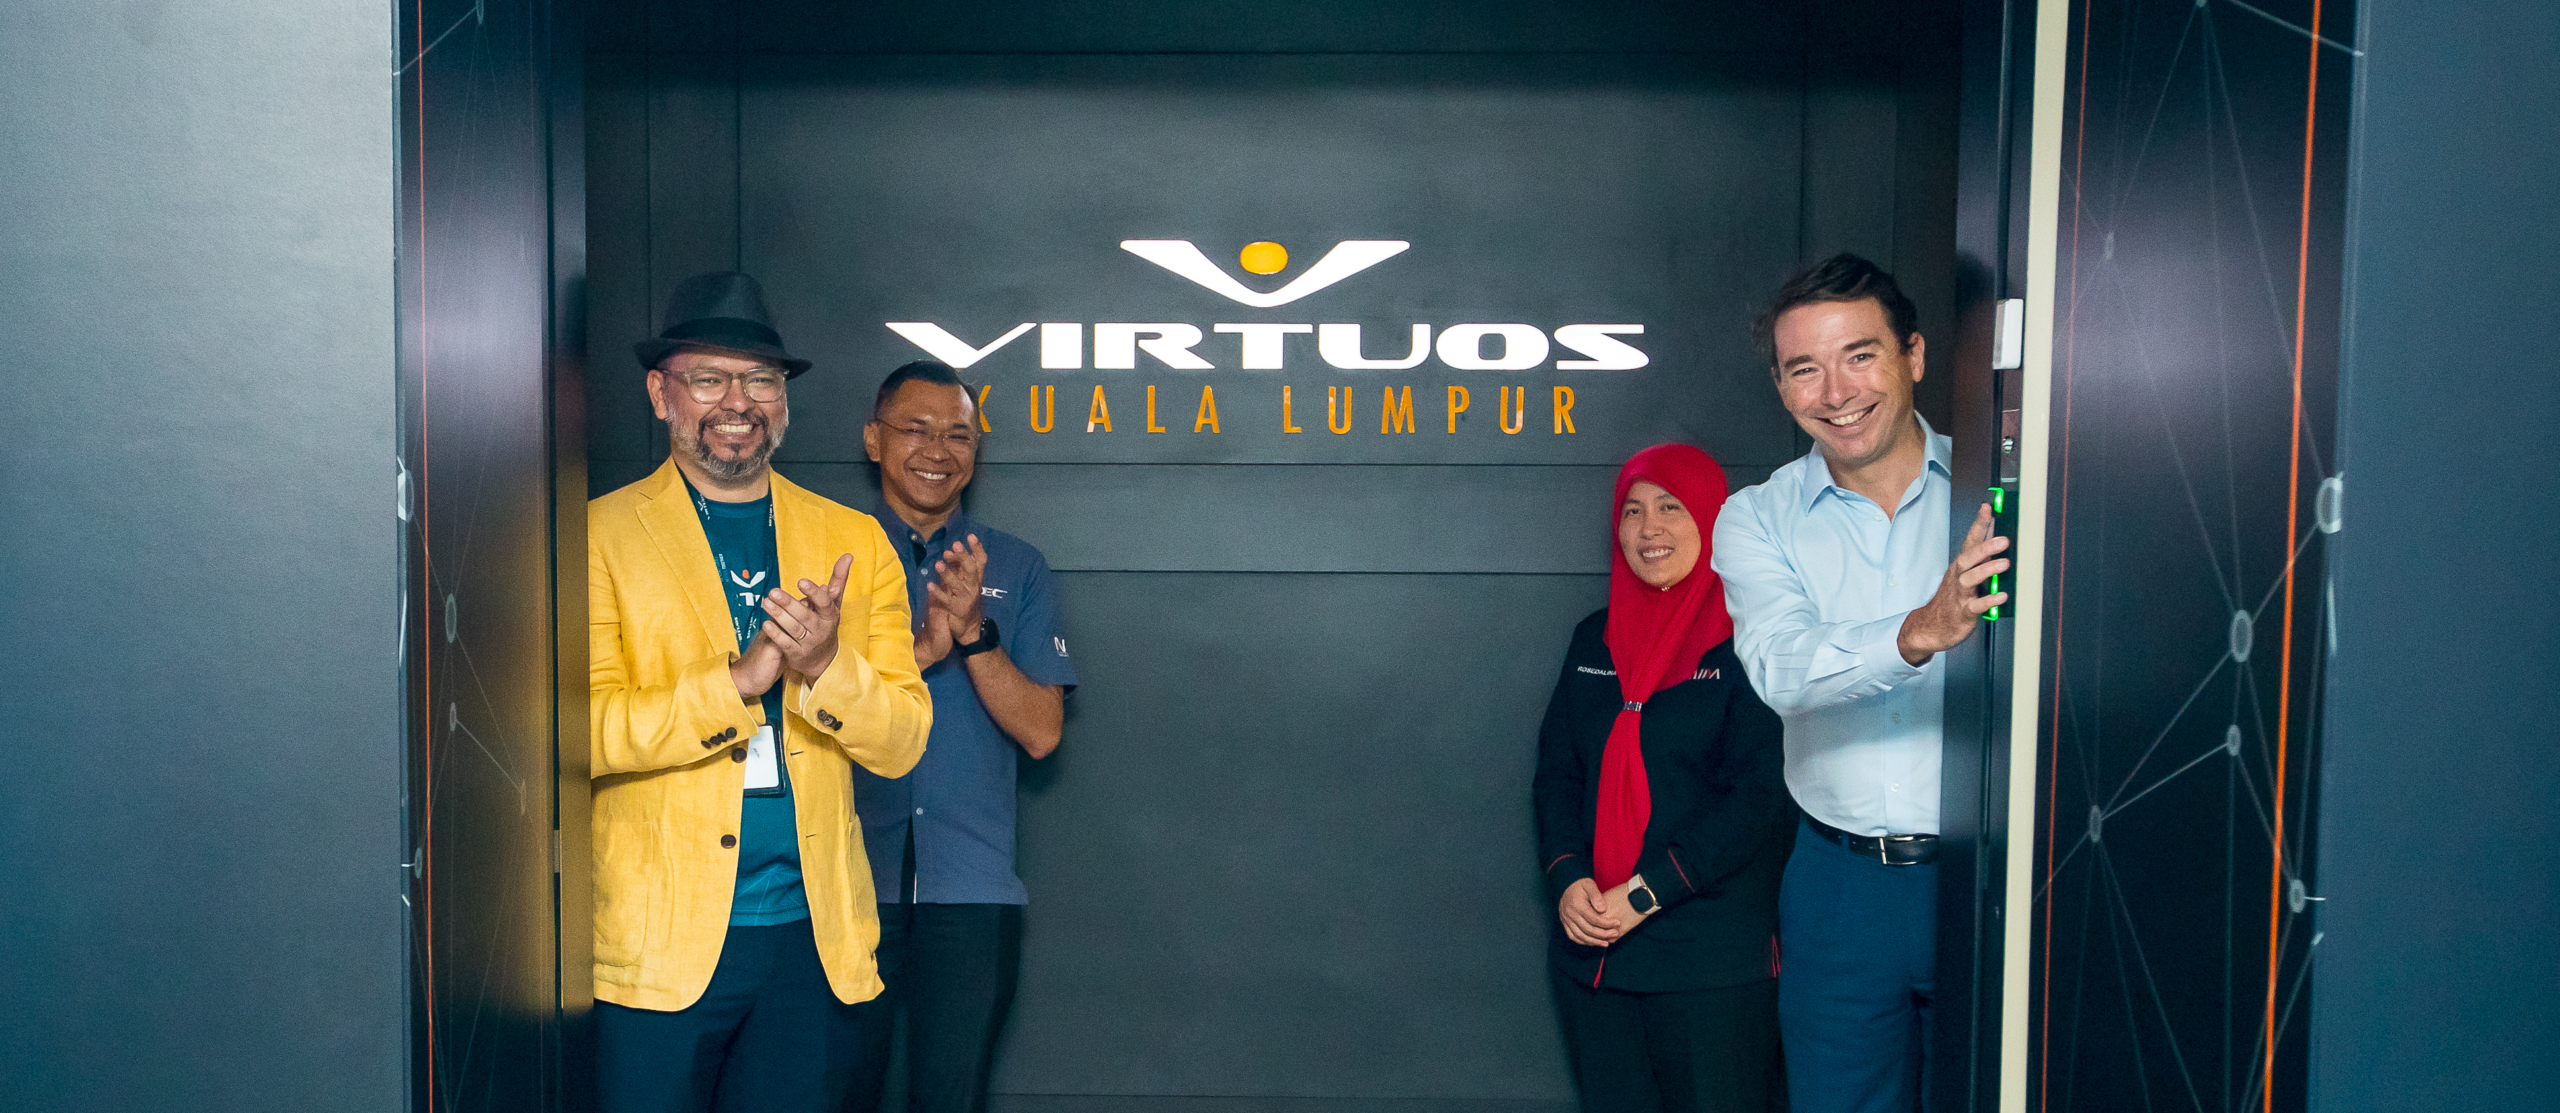 Here’s What Happened at the Virtuos Kuala Lumpur Launch Party!